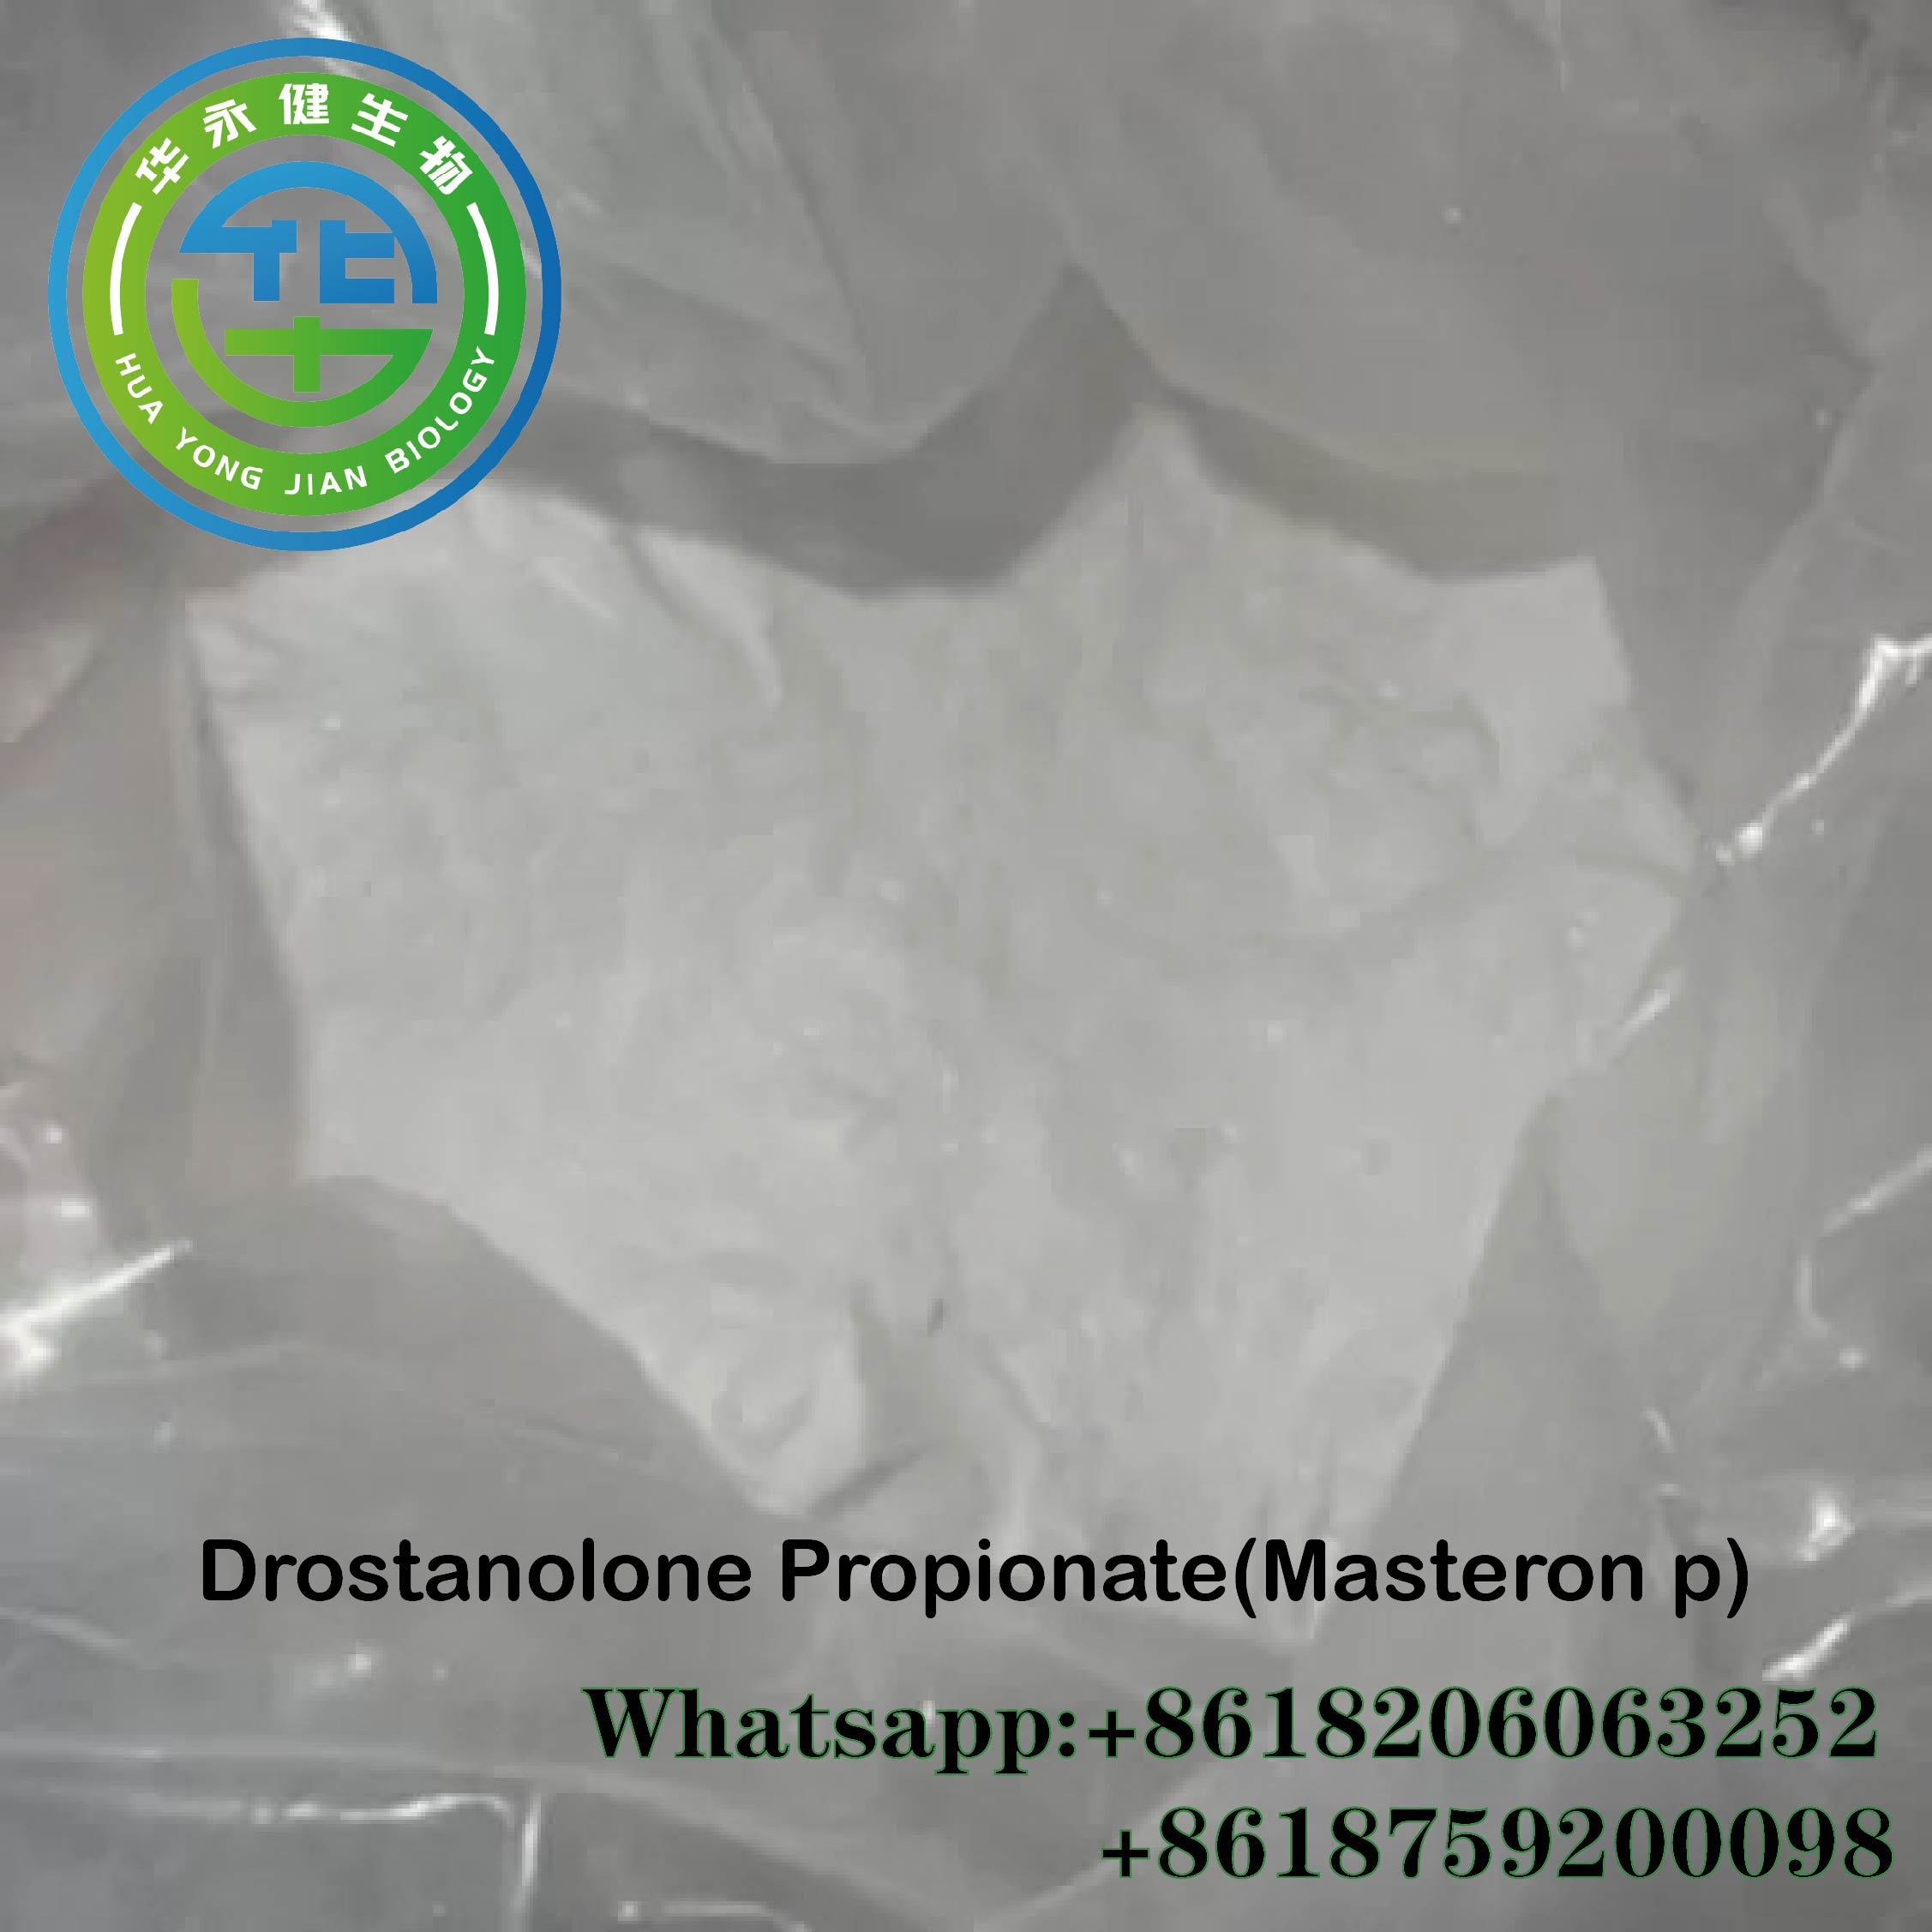 Himsog nga Drostanolone Propionate CasNO.521-12-0 Masteron P Steroid Anabolic Muscle Building Featured Image